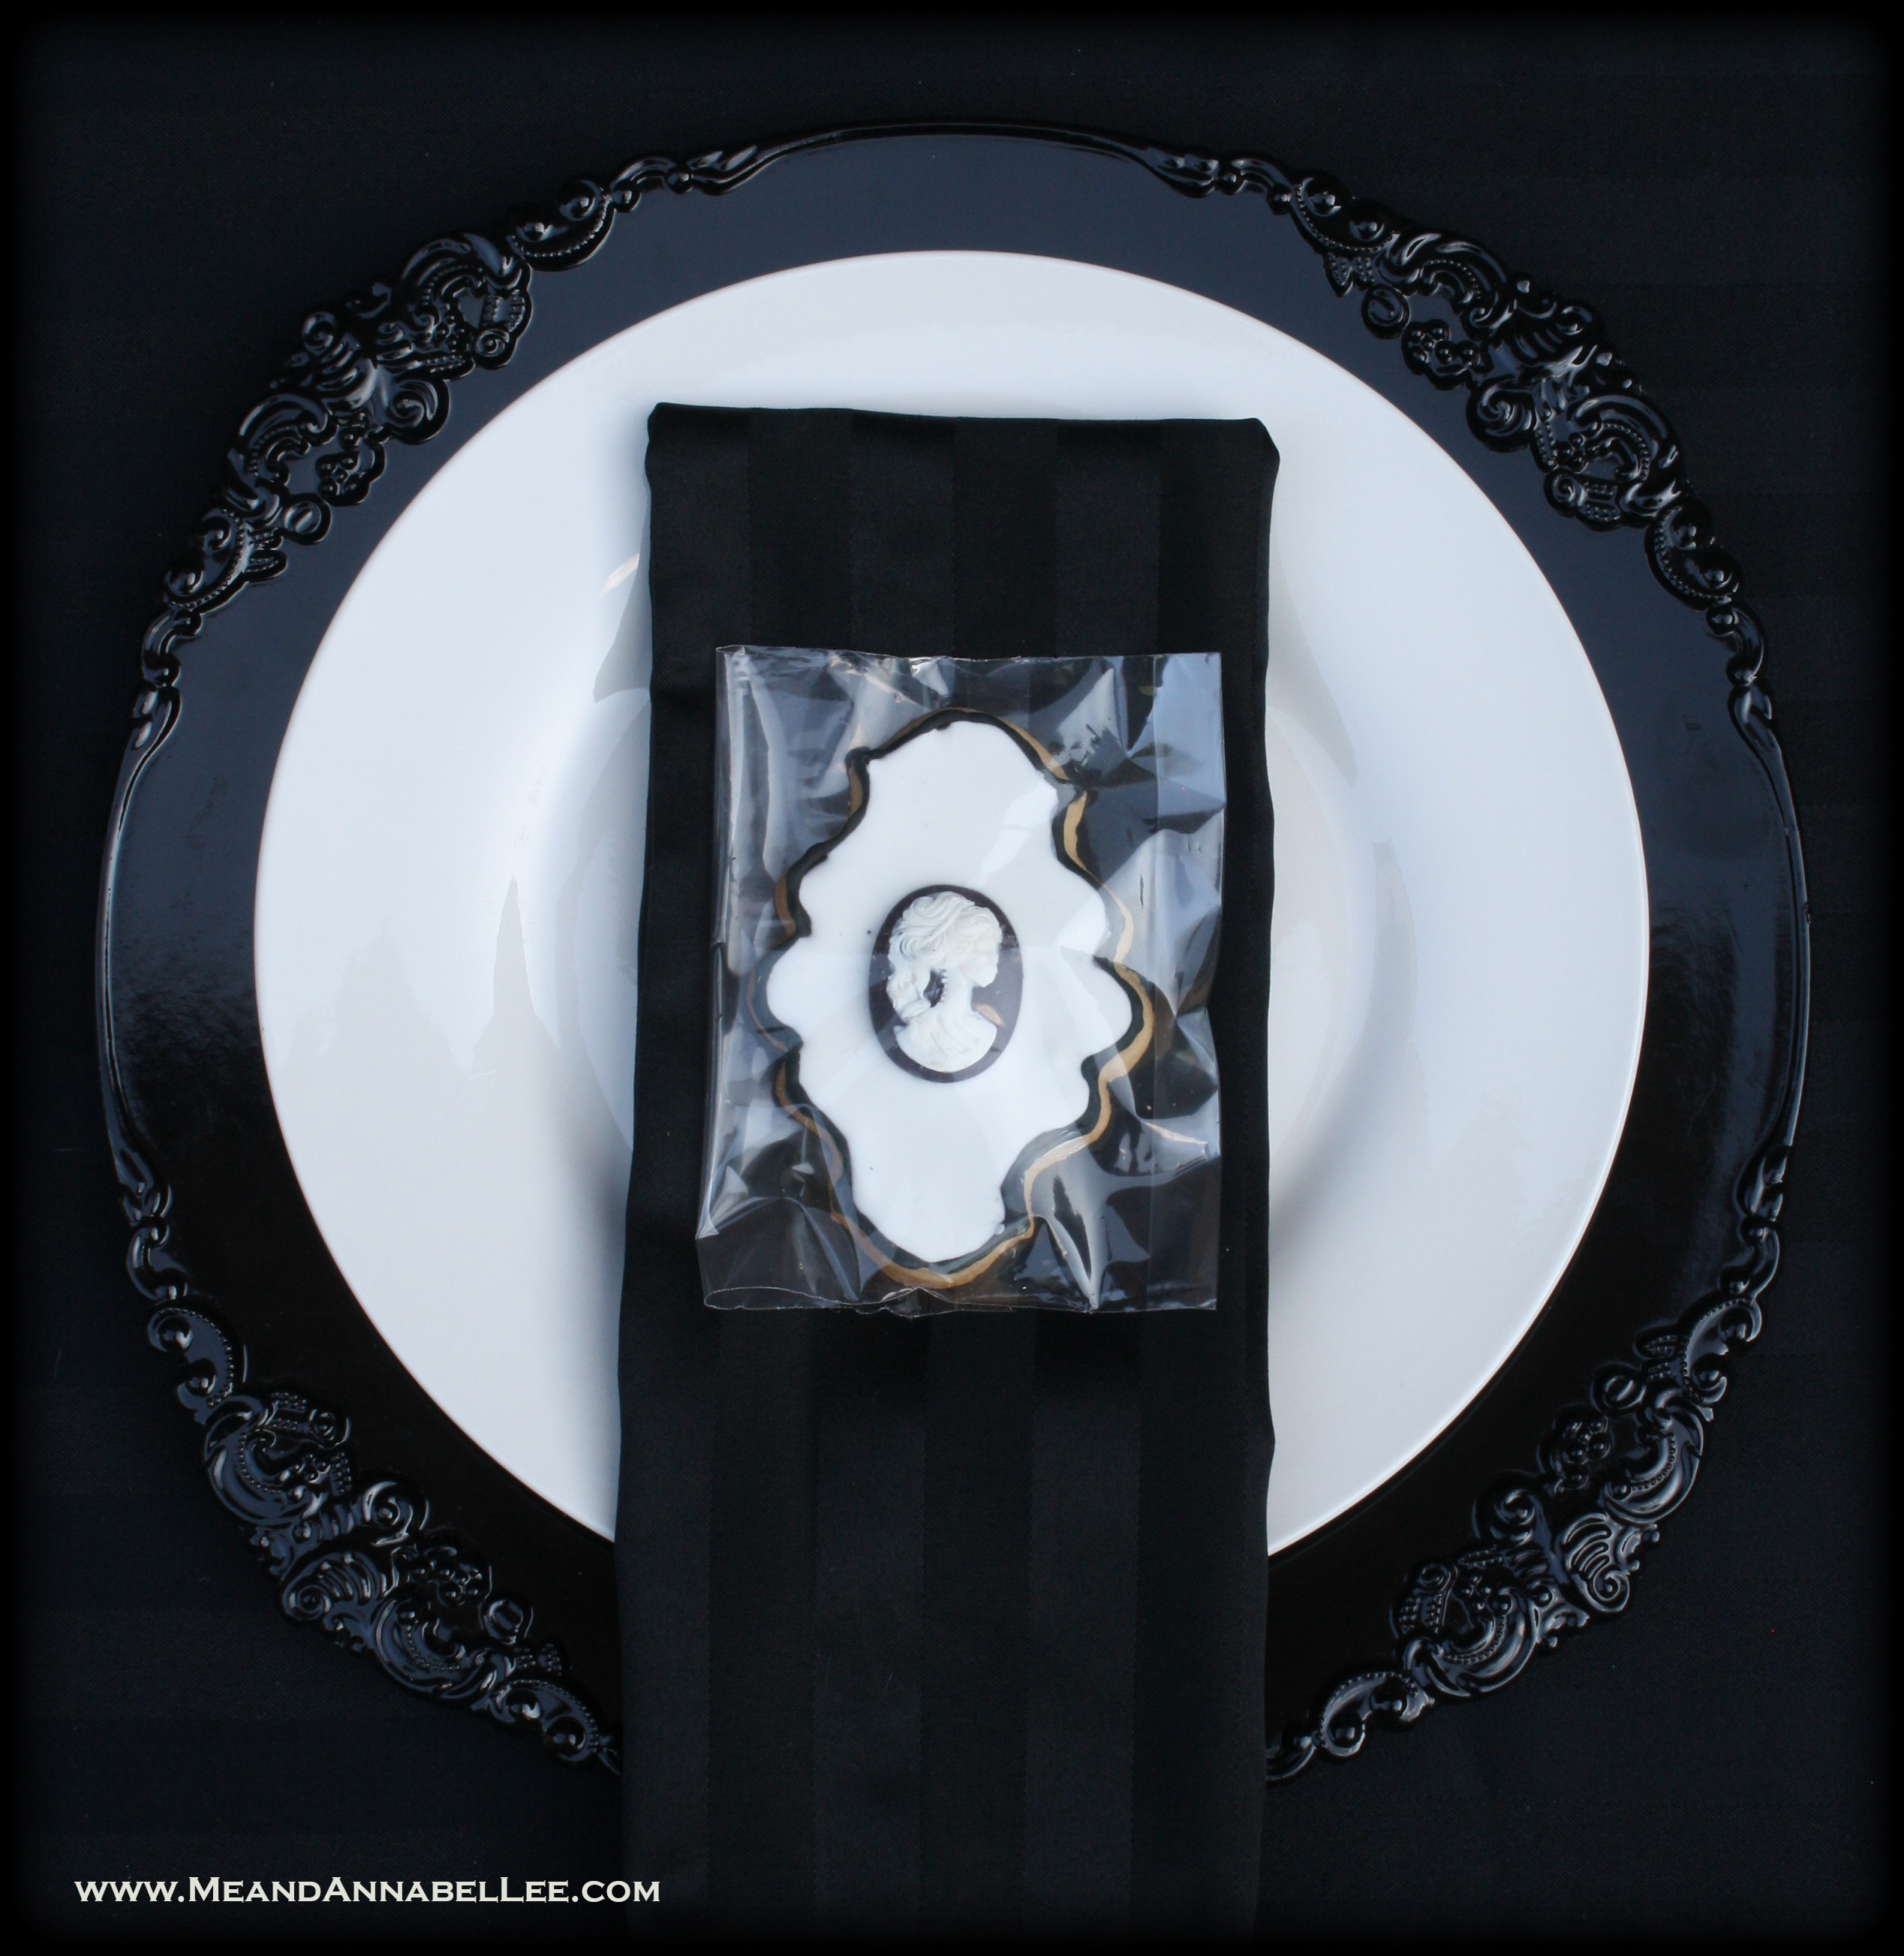 Edible Wedding Favors | Victorian Gothic Skeleton Cameo Cookies | Black & White Wedding Place Setting | www.MeandAnnabelLee.com